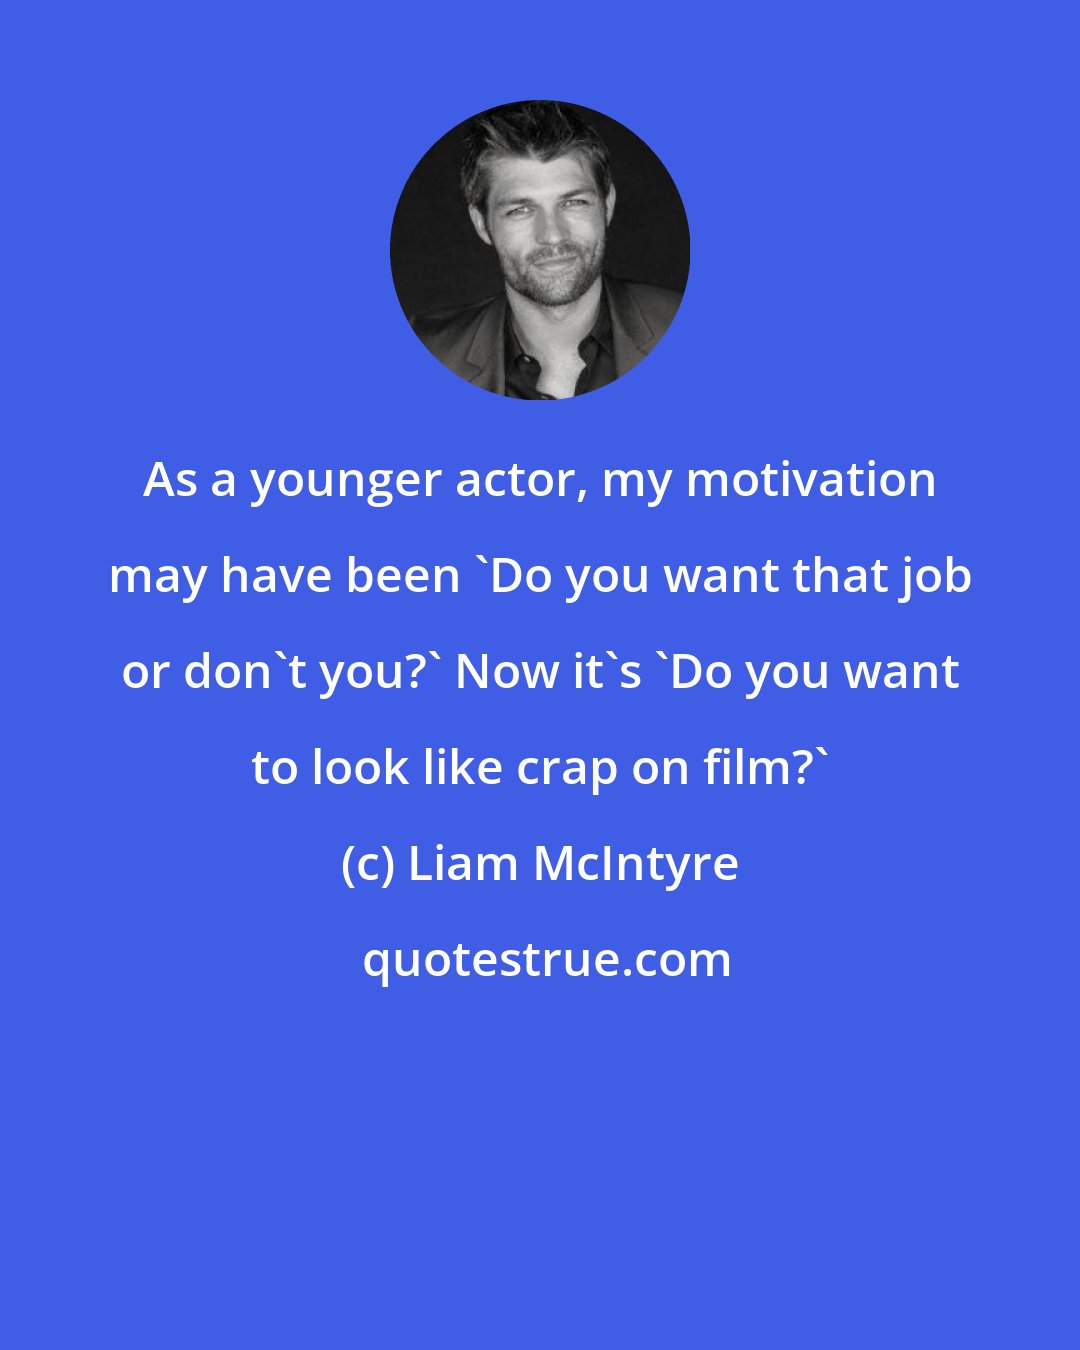 Liam McIntyre: As a younger actor, my motivation may have been 'Do you want that job or don't you?' Now it's 'Do you want to look like crap on film?'